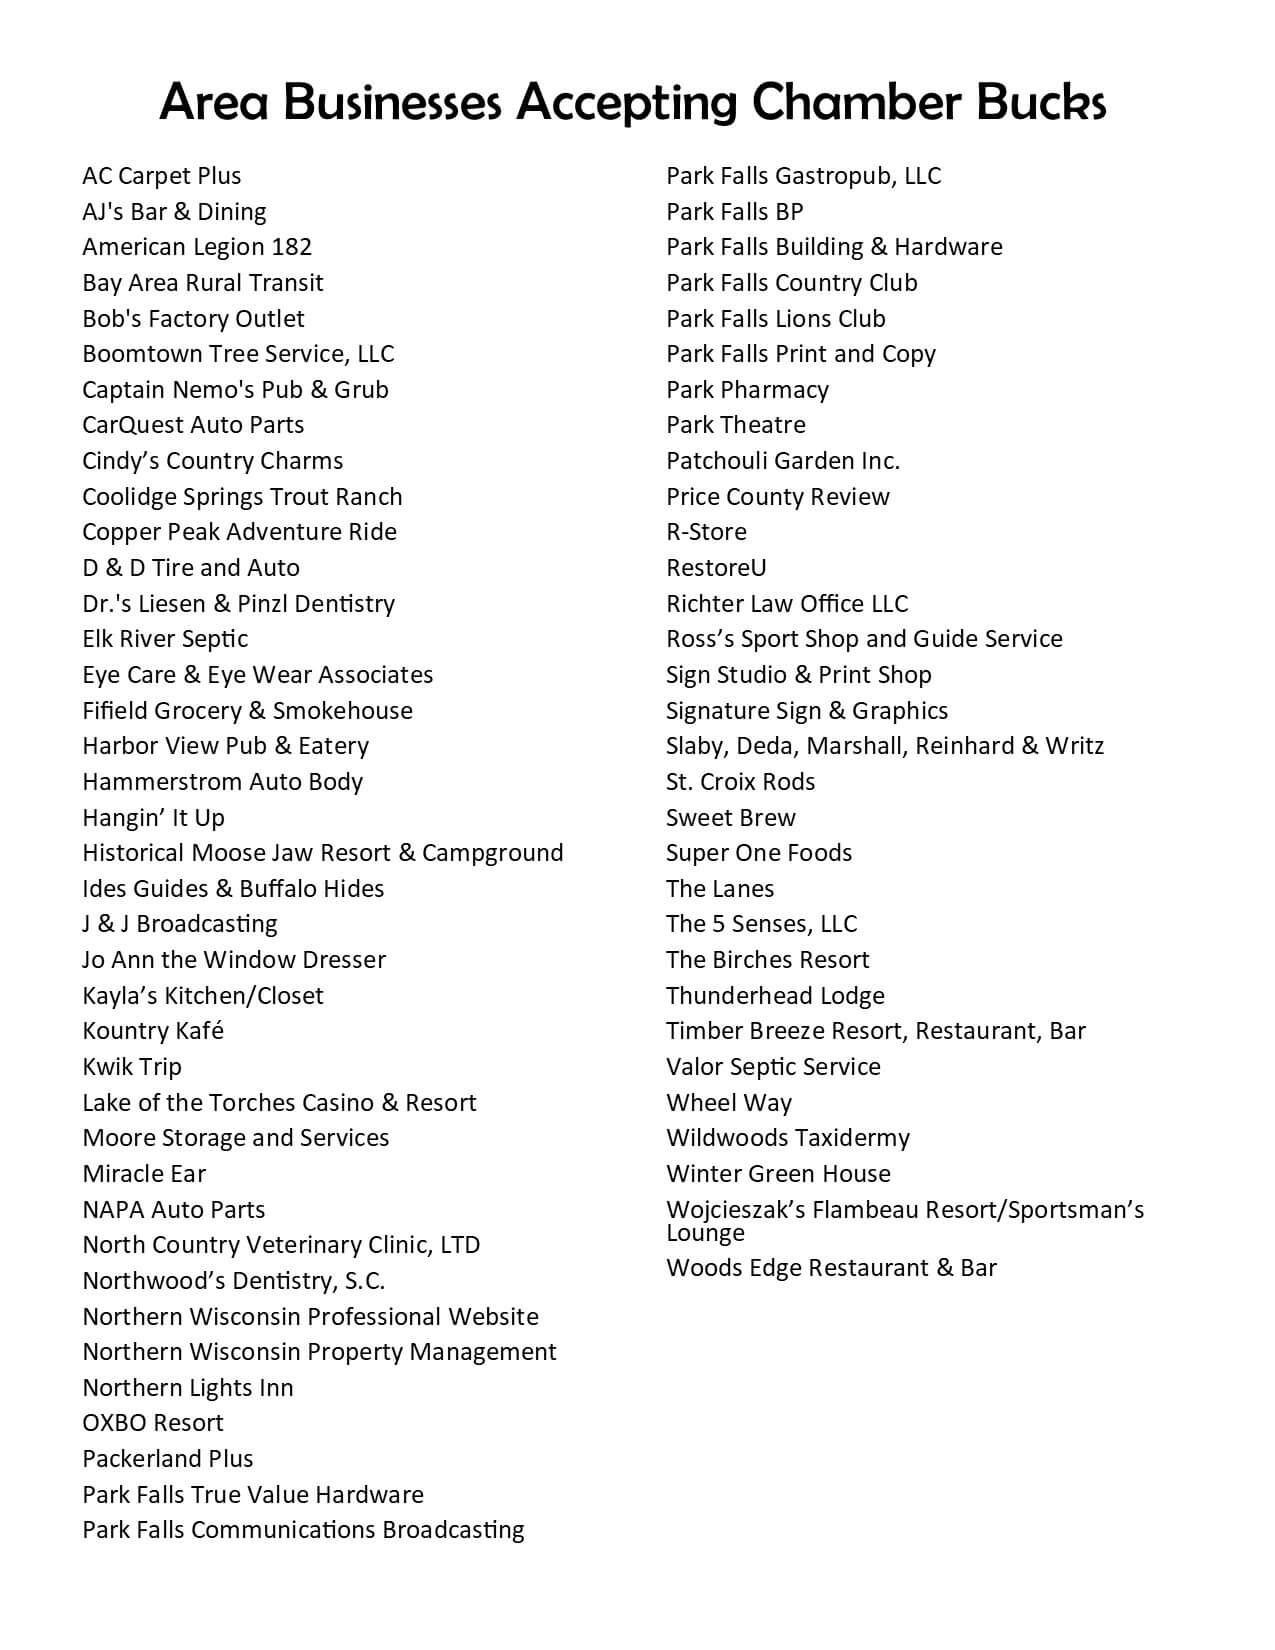 Participating Chamber Bucks Businesses List